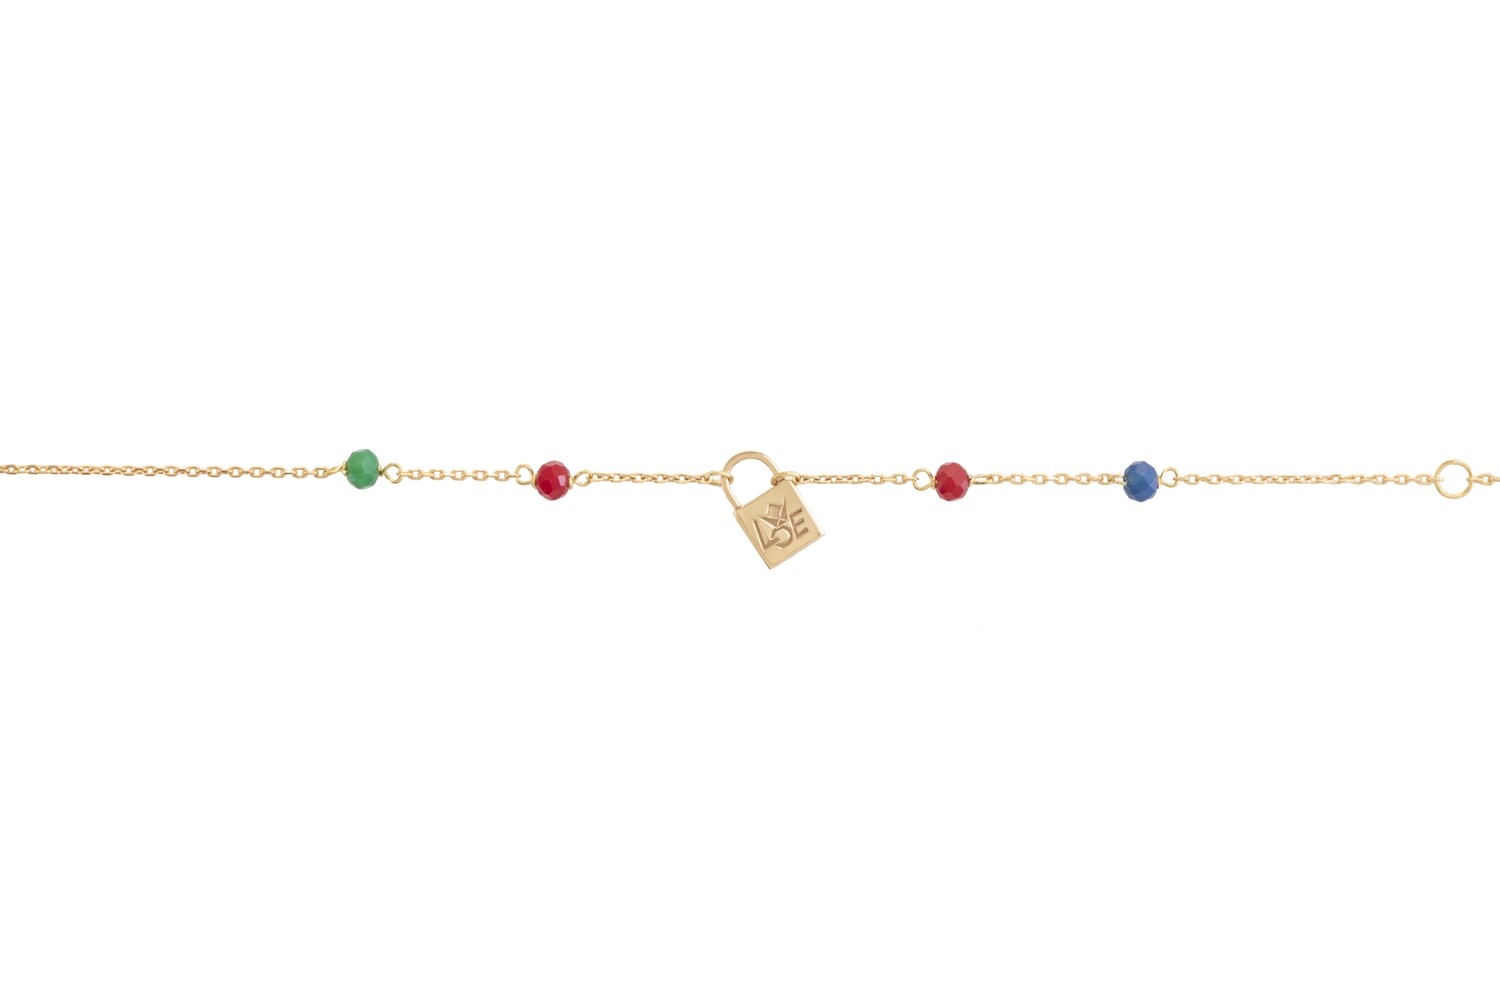 Lock Gold Bracelet Love with Colored Stones